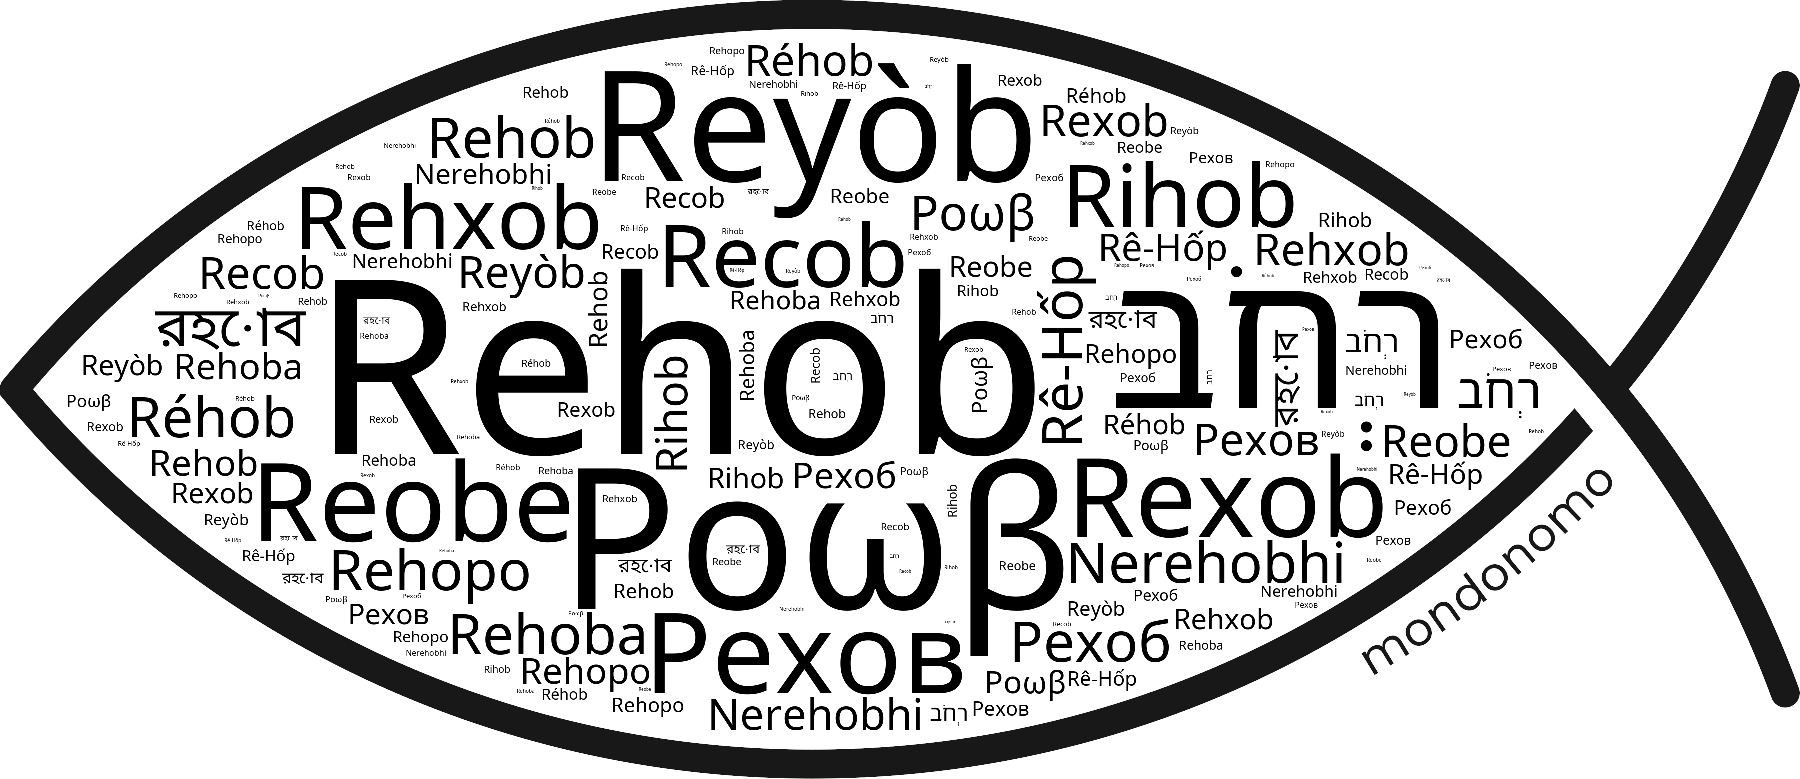 Name Rehob in the world's Bibles